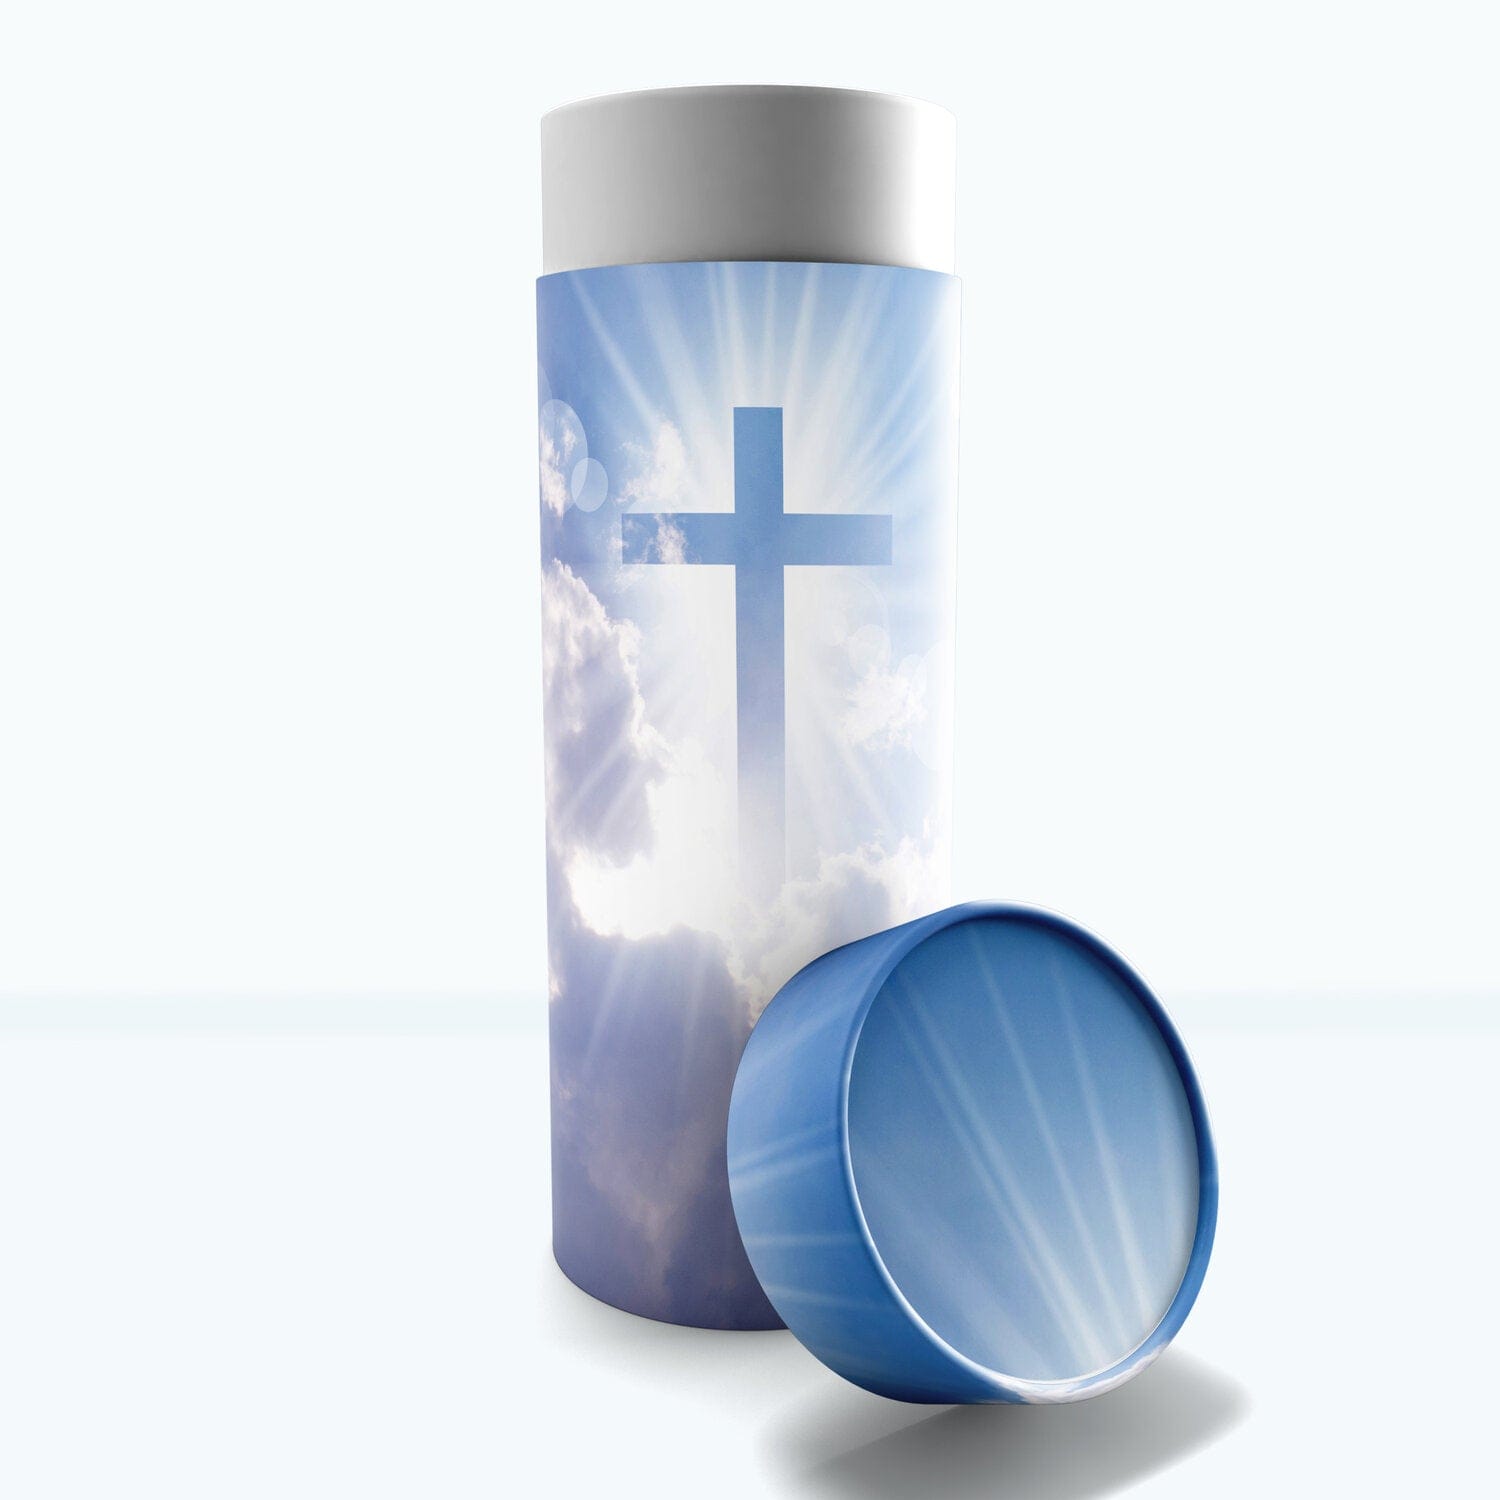 Commemorative Cremation Urns Small Heavenly Cross - Biodegradable & Eco Friendly Burial or Scattering Urn / Tube